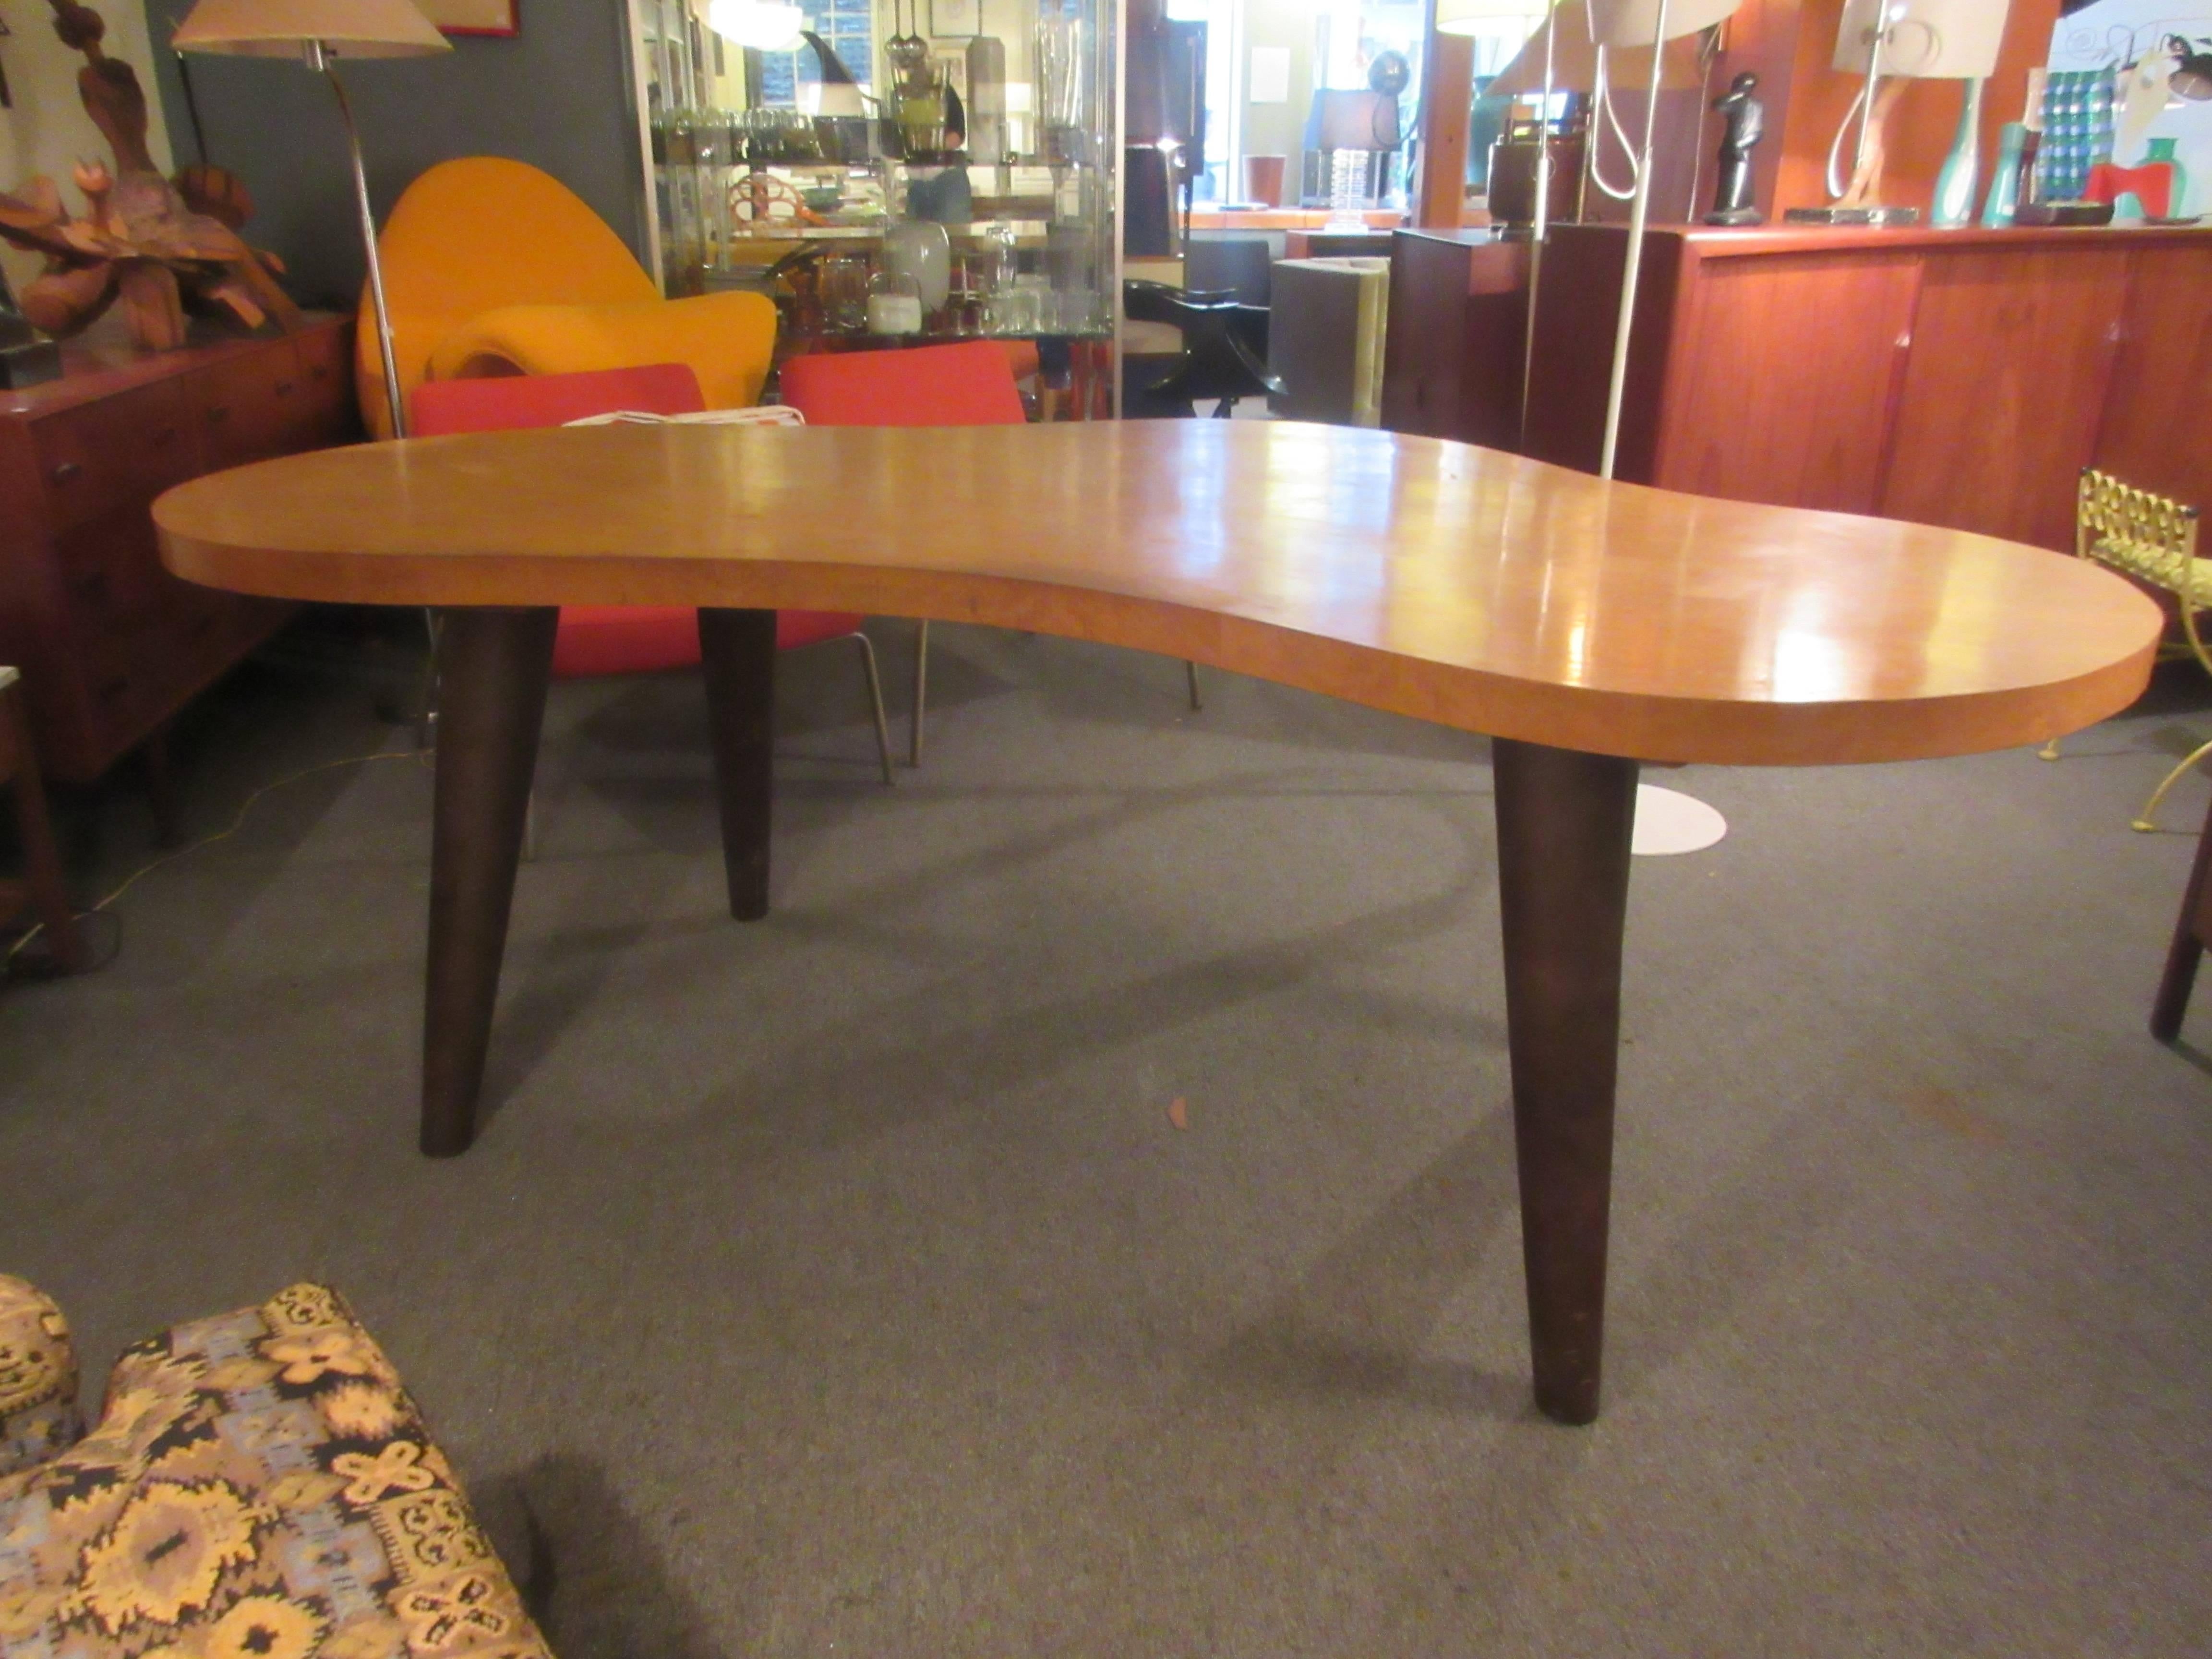 Massive Urban dining table or desk as you wish. Top is a bird's-eye maple and conical legs are covered in deep chocolate leather. Table or desk is all original and in great condition. Would seat eight as a dining table. Legs detach for shipping if